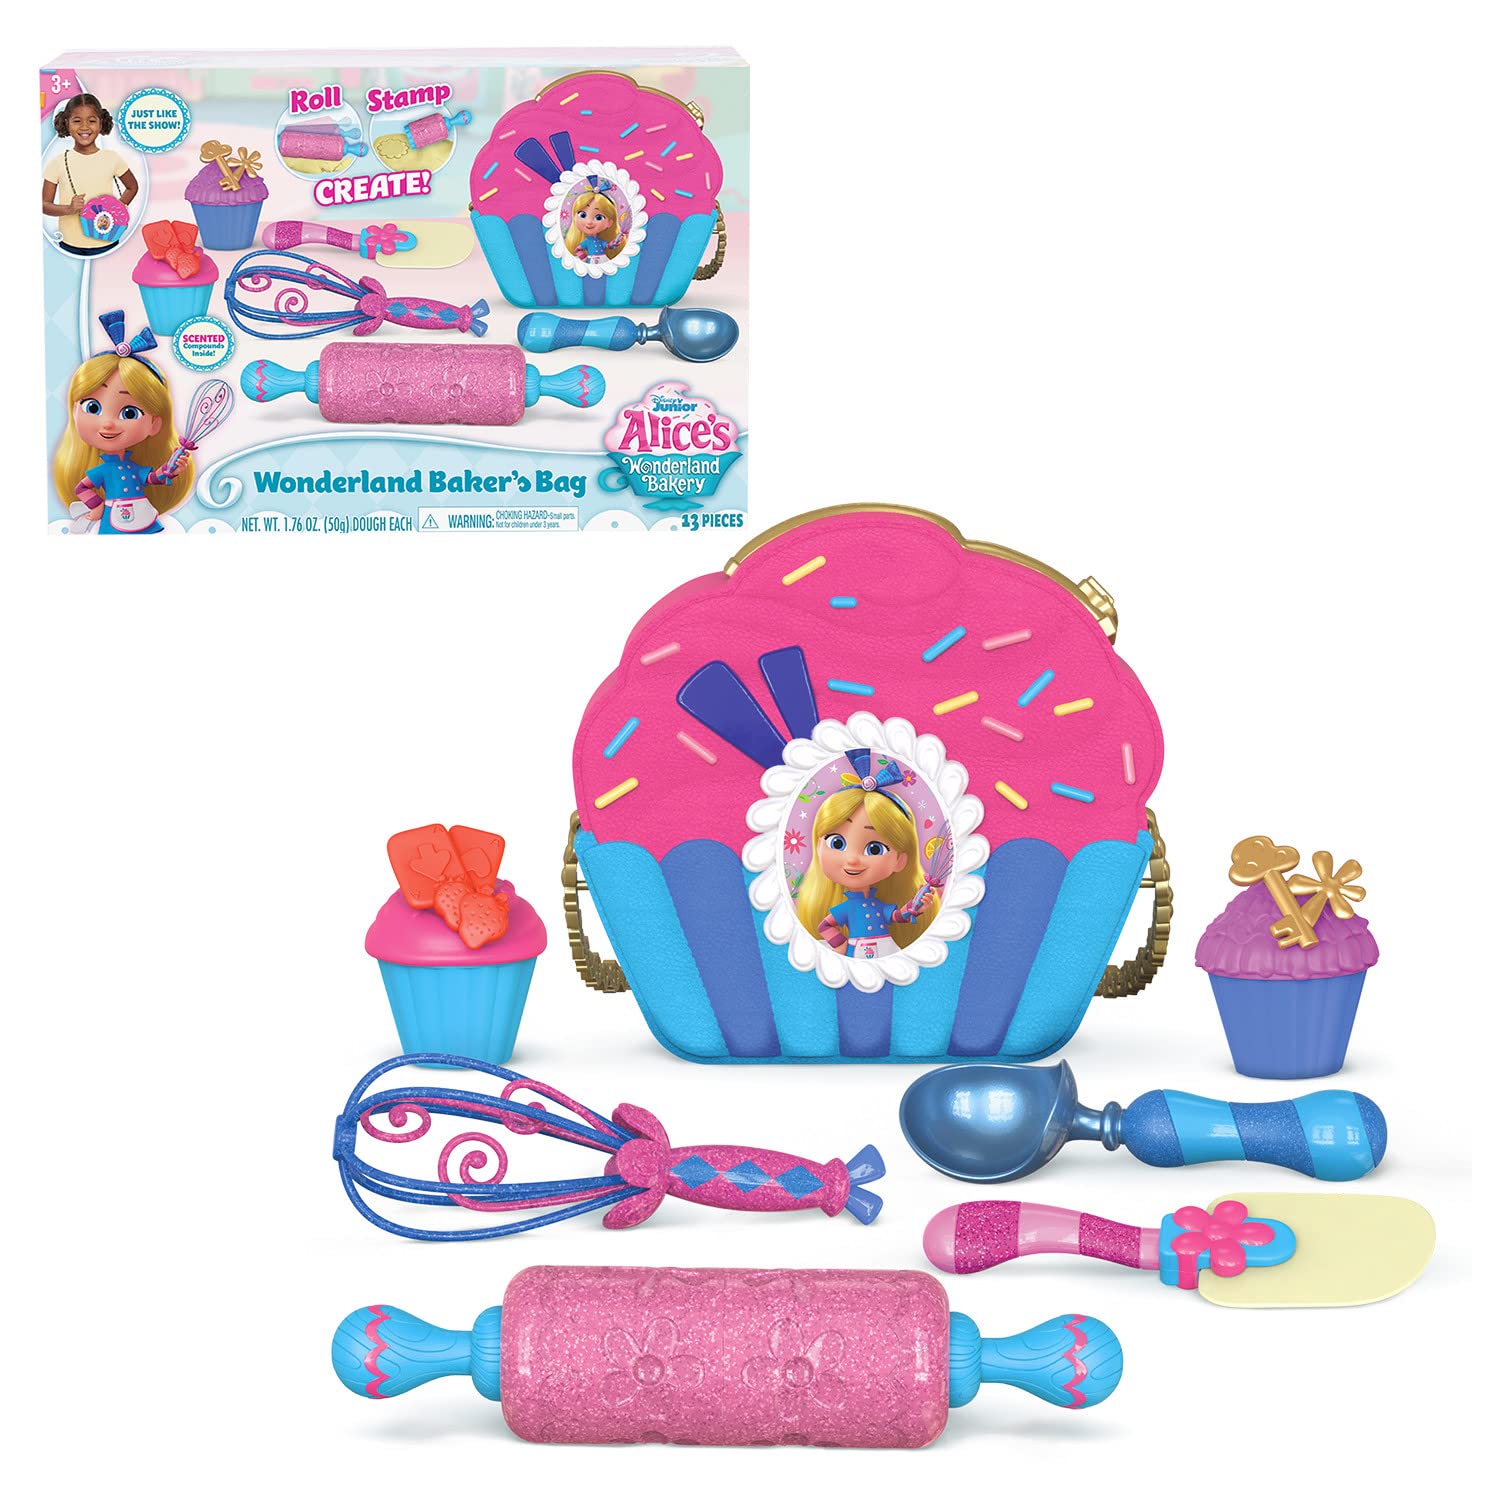 11-Pc Disney Junior Alice’s Wonderland Bakery Bag Set w/ Toy Kitchen Accessories $6.73 + Free Shipping w/ Prime or on $35+